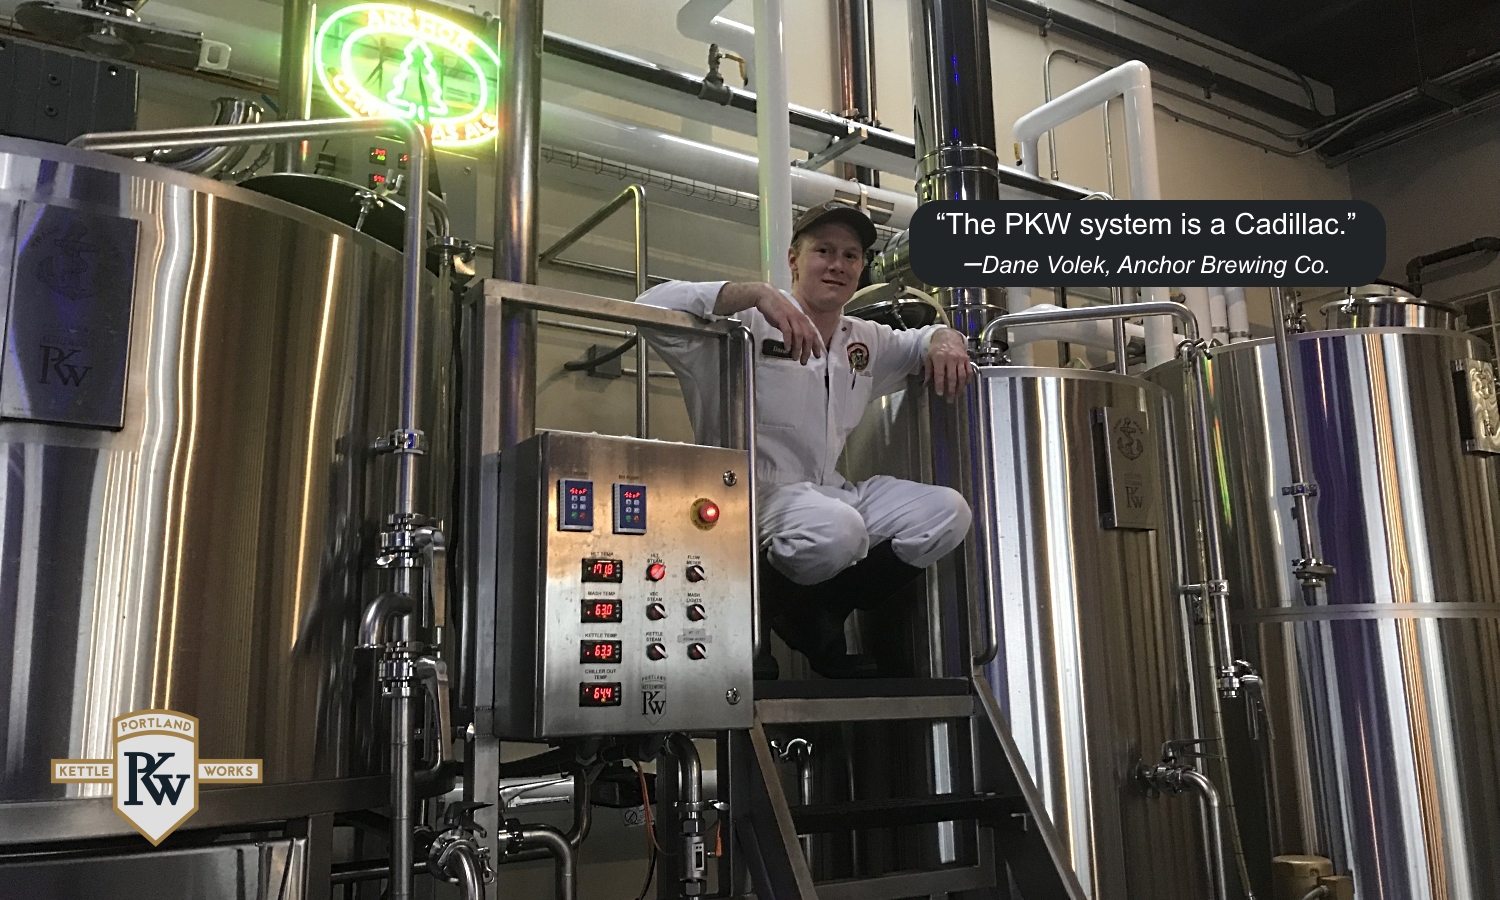 Brewing Equipment at Anchor Brewery & Client Testimonial